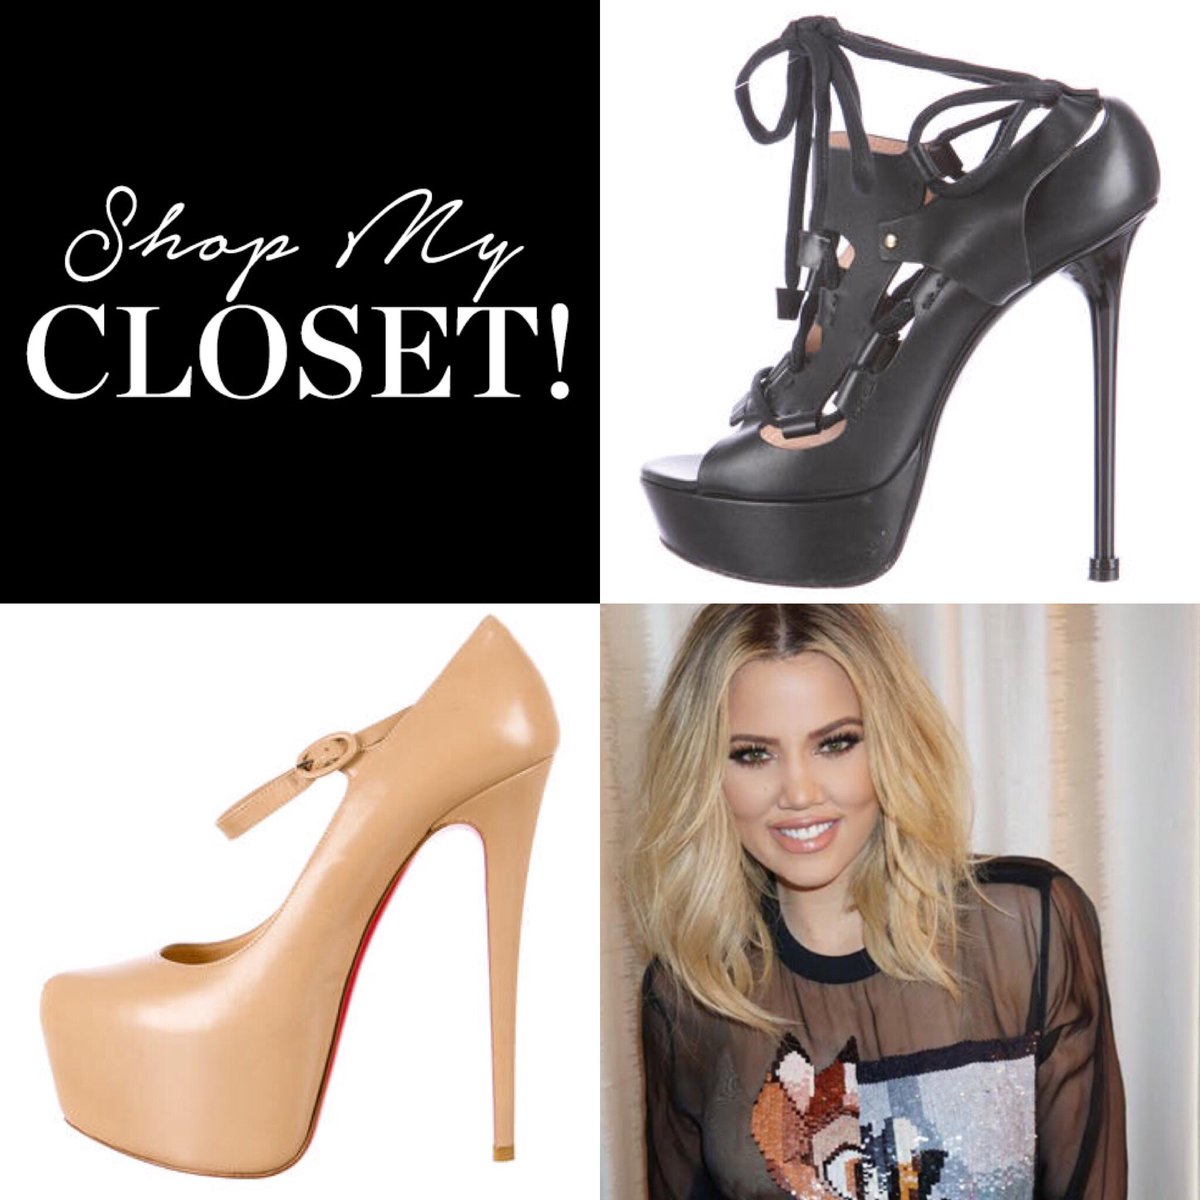 Only a few items left, including my Versace + Louboutin heels! Shop before they're gone! https://t.co/NqObT4hFHv https://t.co/zU1VeM2FhP